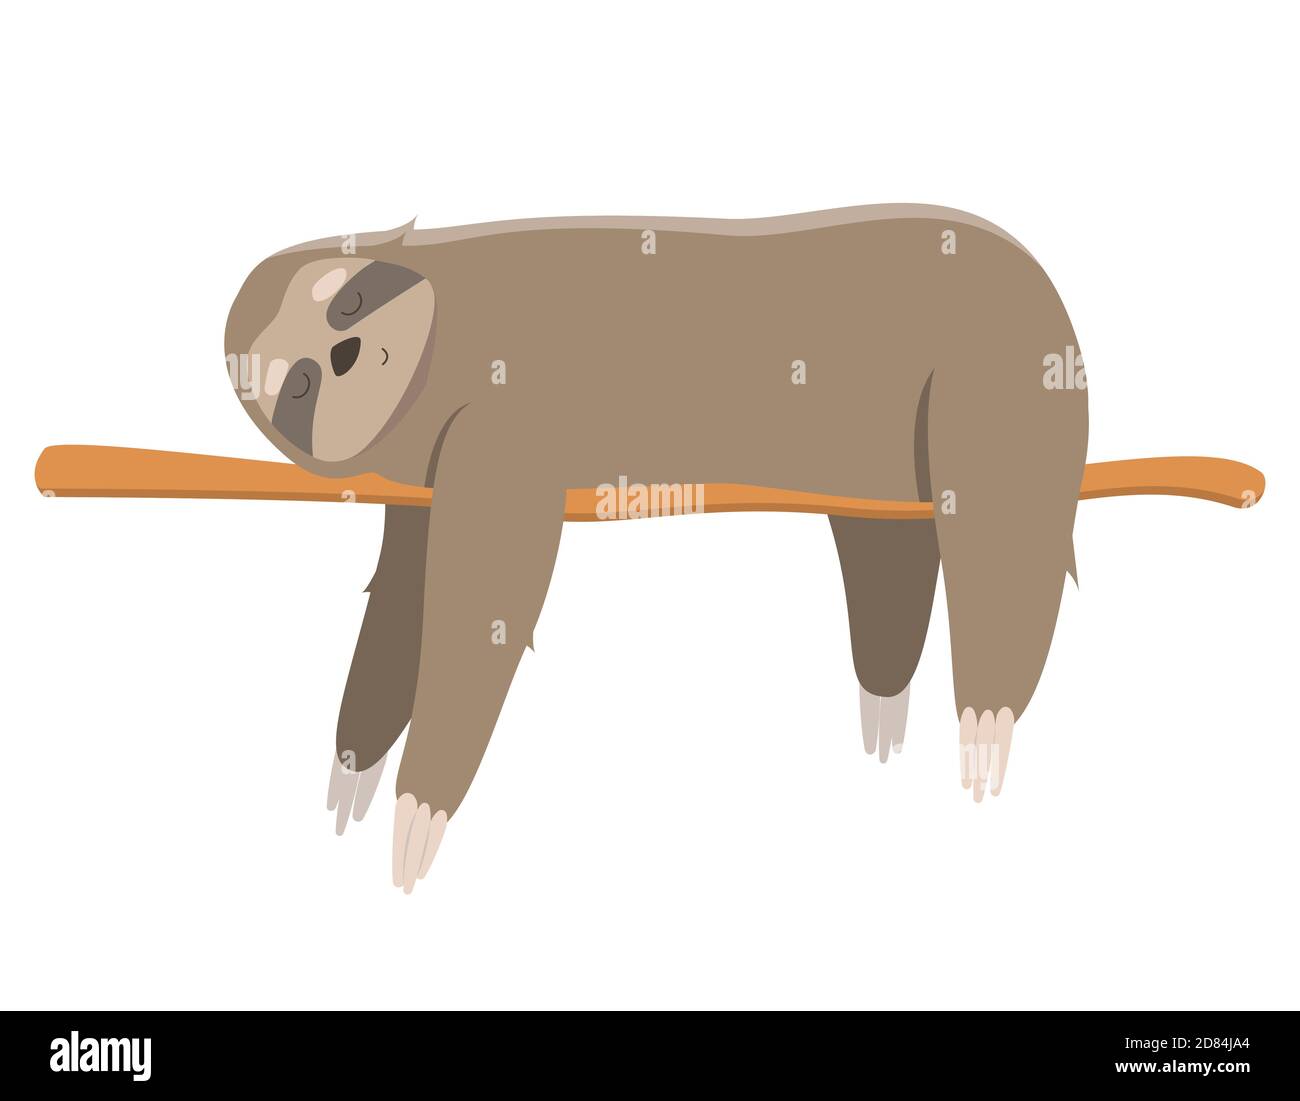 Sloth sleeping on branch. Vector illustration in cartoon style isolated on white background. Stock Vector